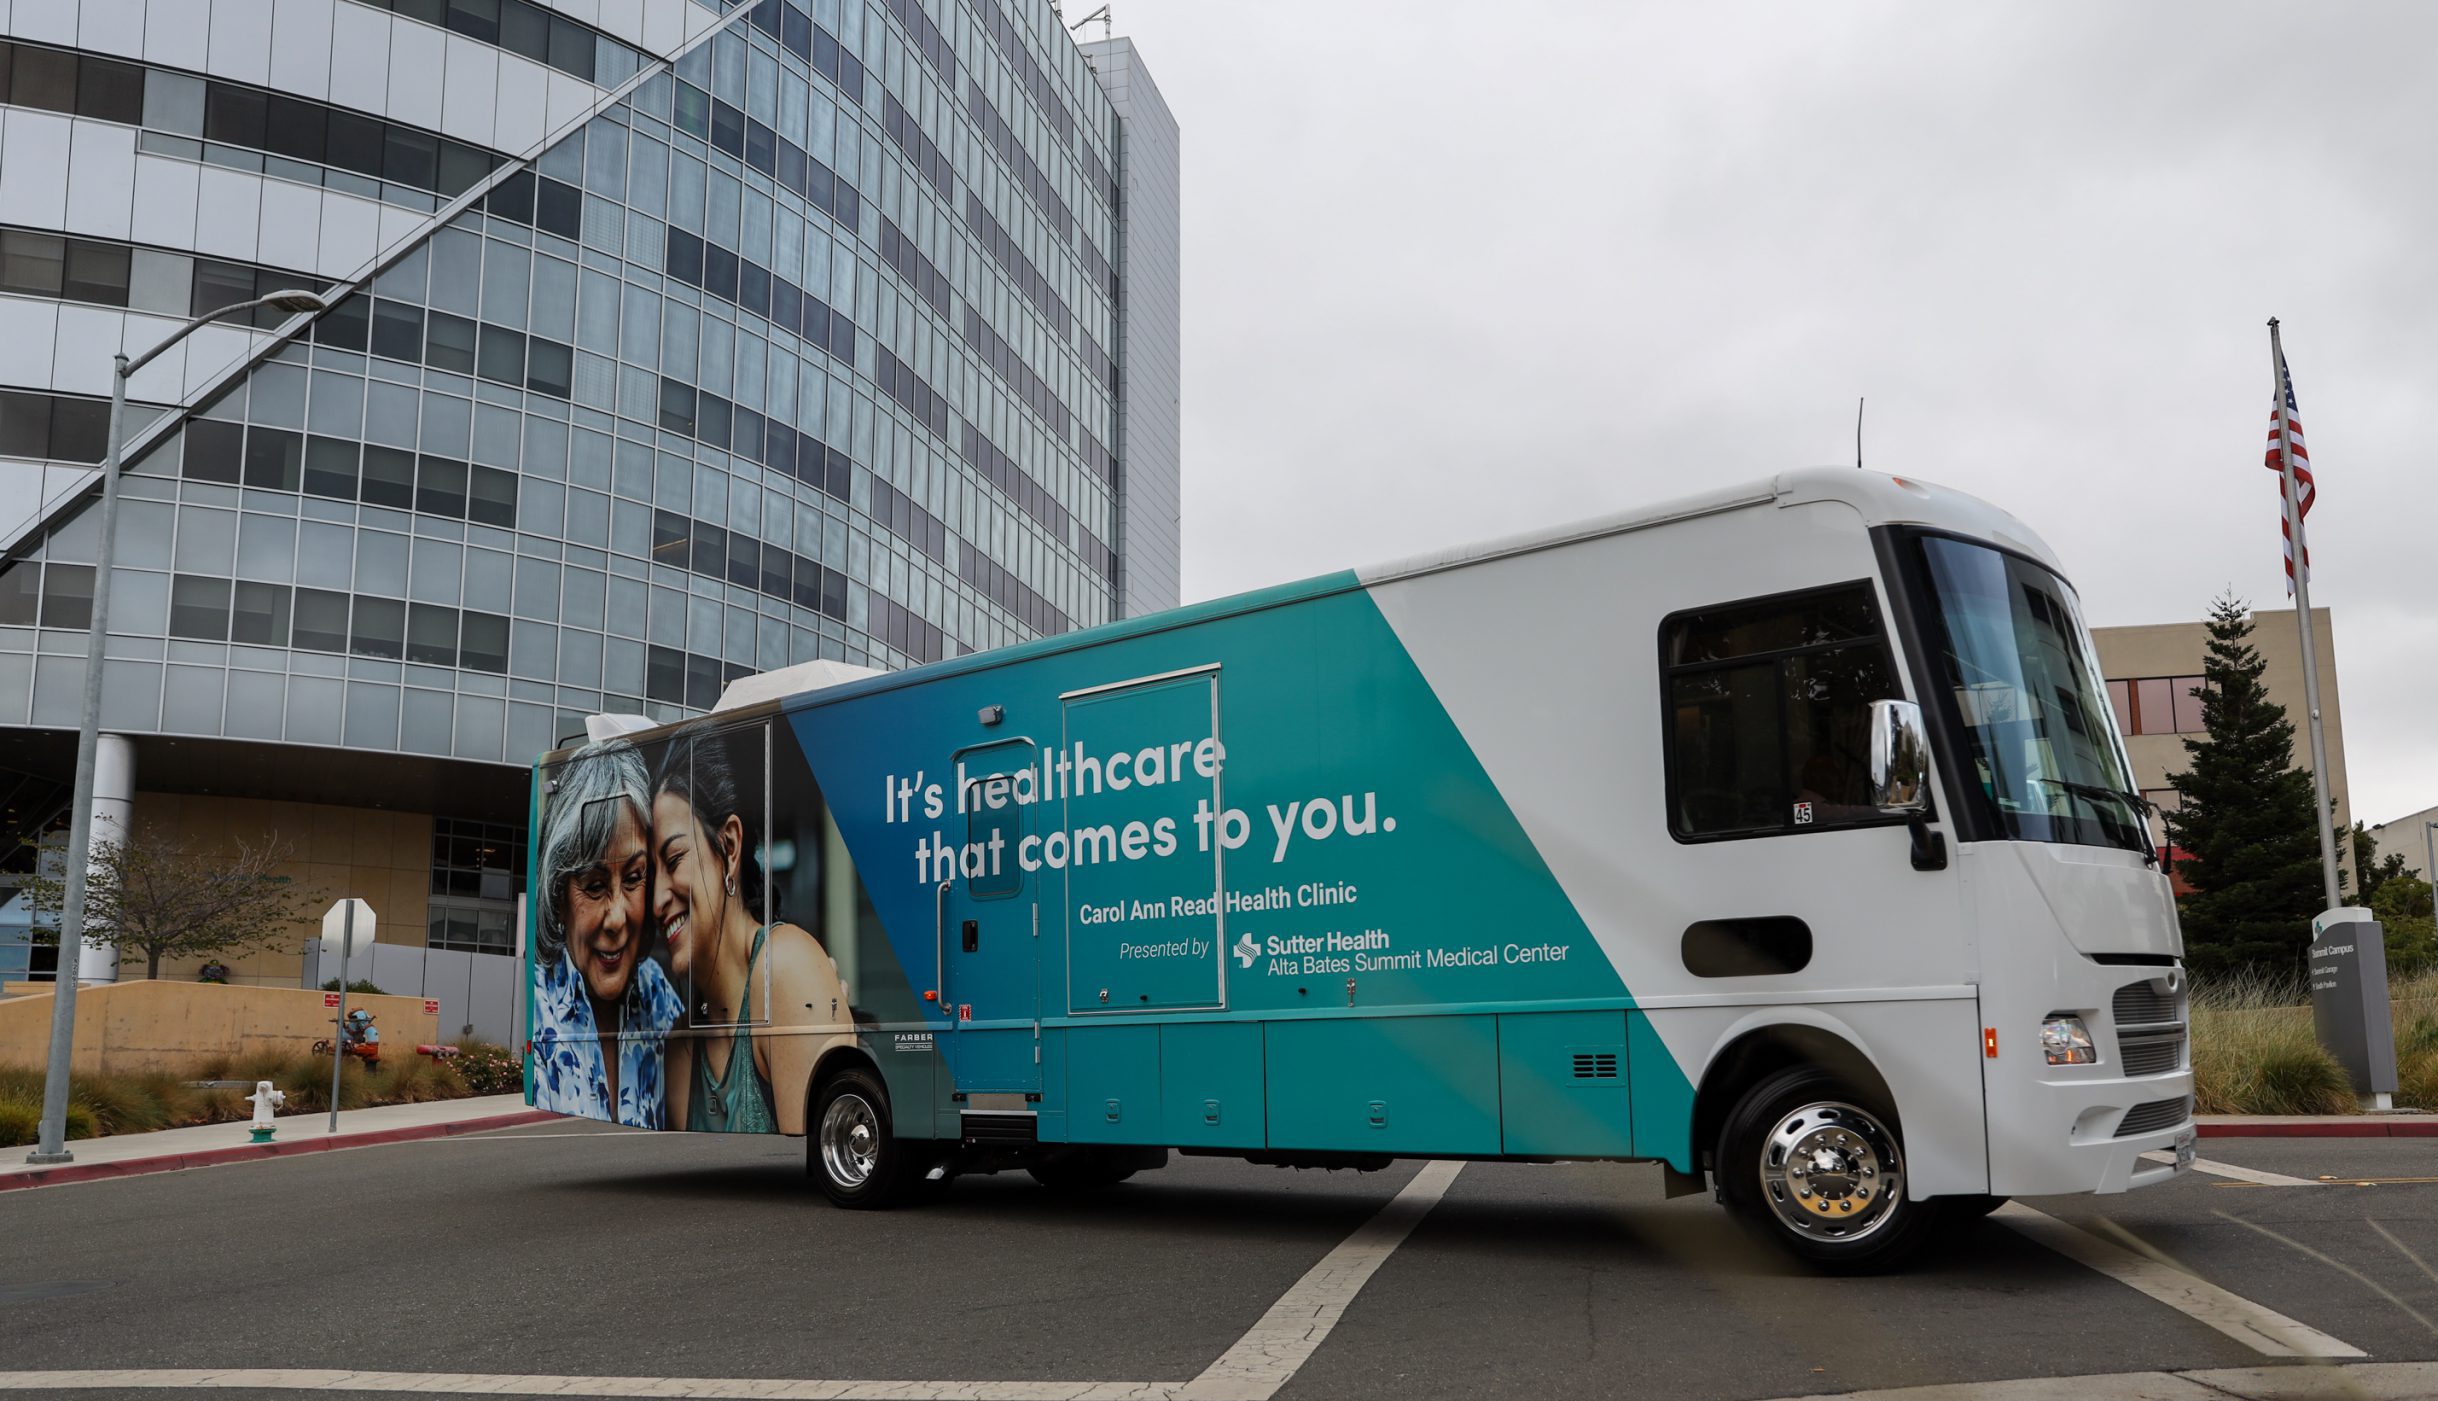 Carol Ann Read Breast Health Center's Mobile Mammography Vehicle brings screening mammography to the community.